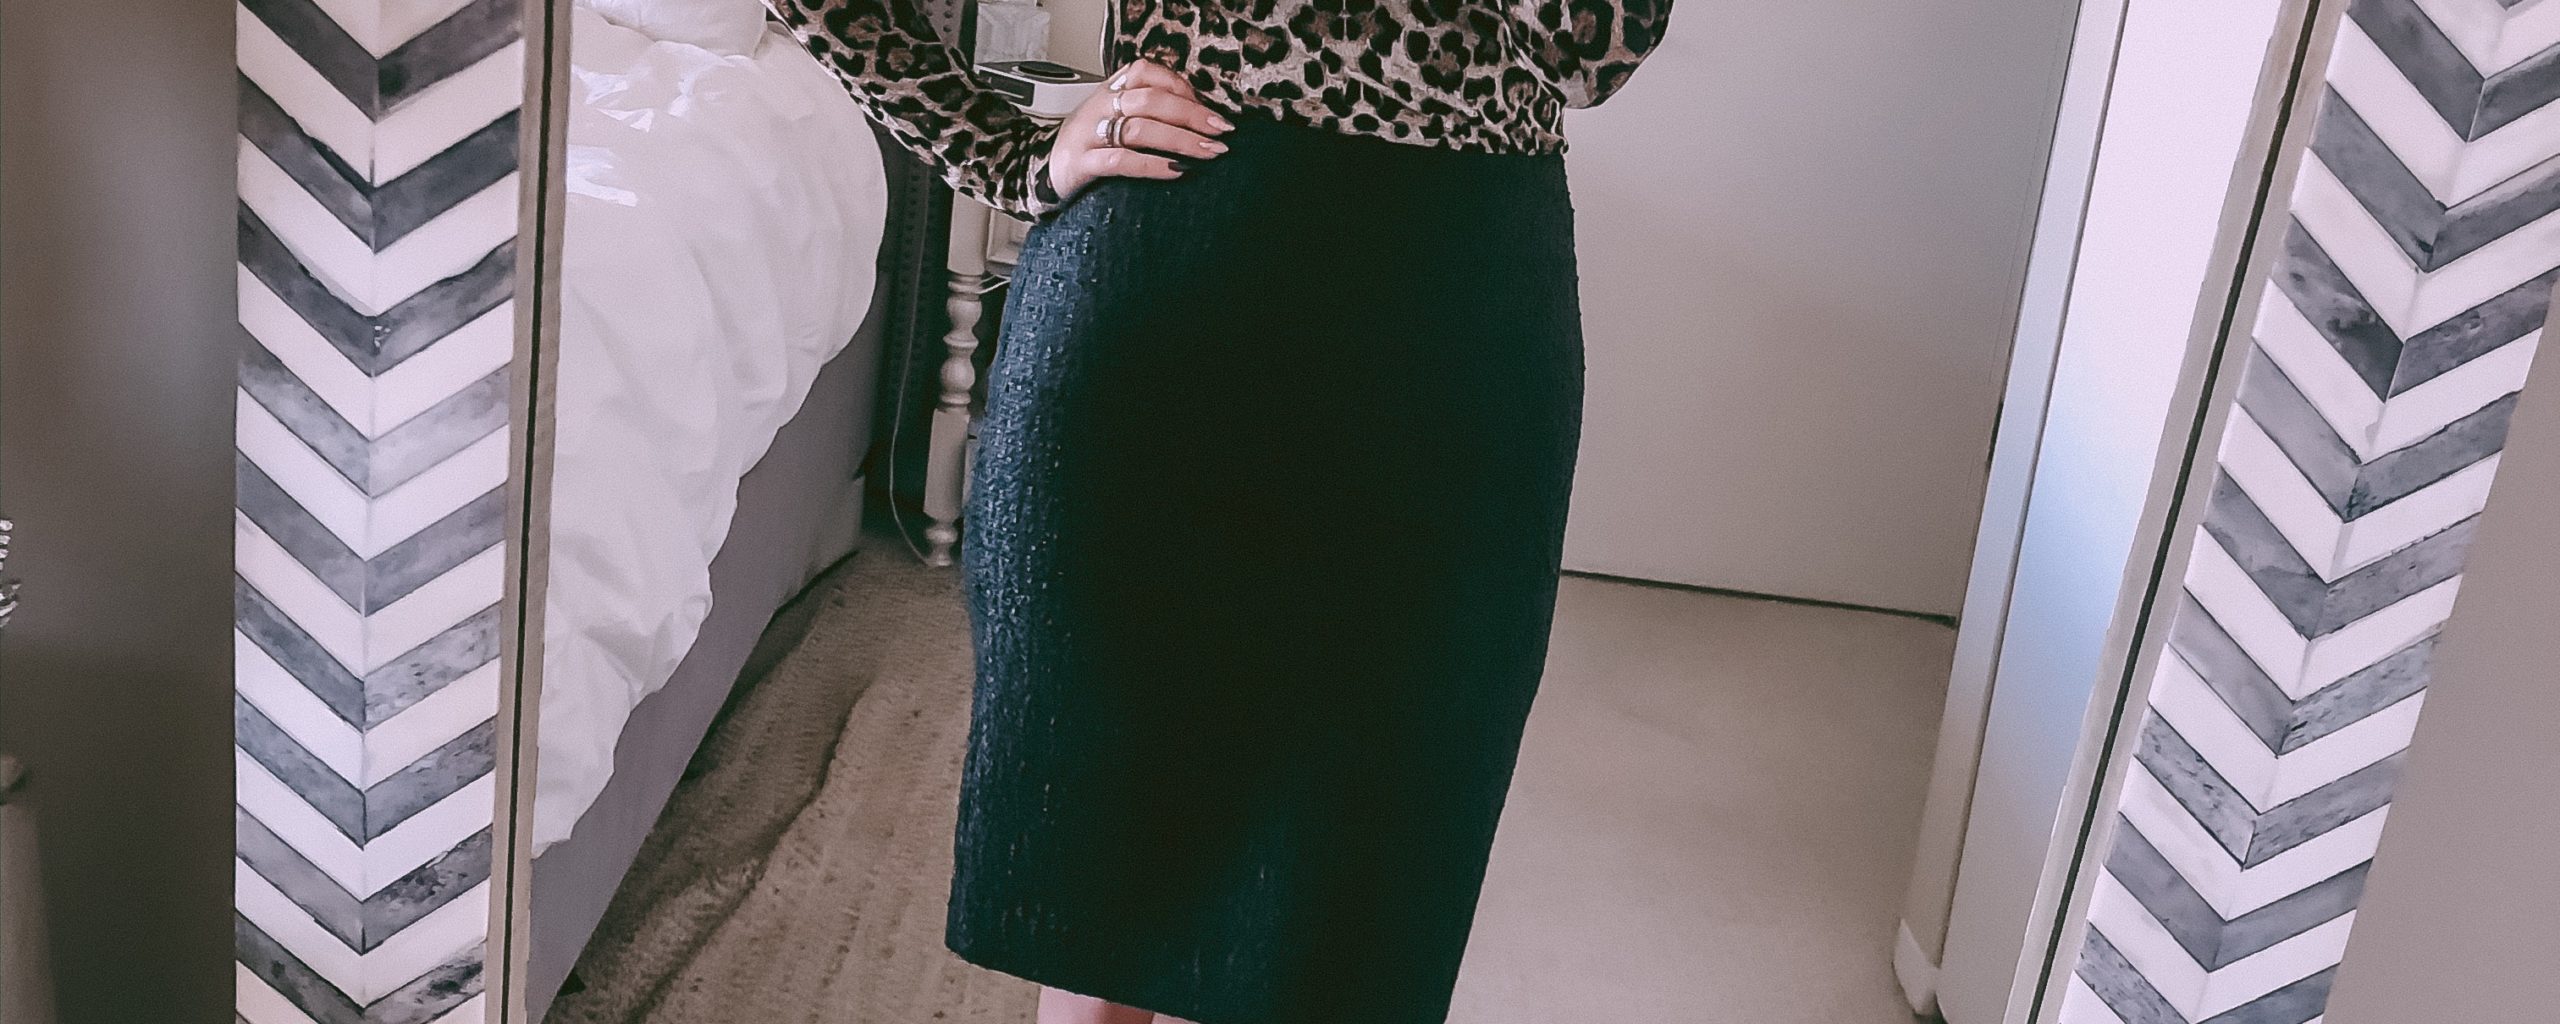 leopard tee and a black pencil skirt for the office outfit ideas